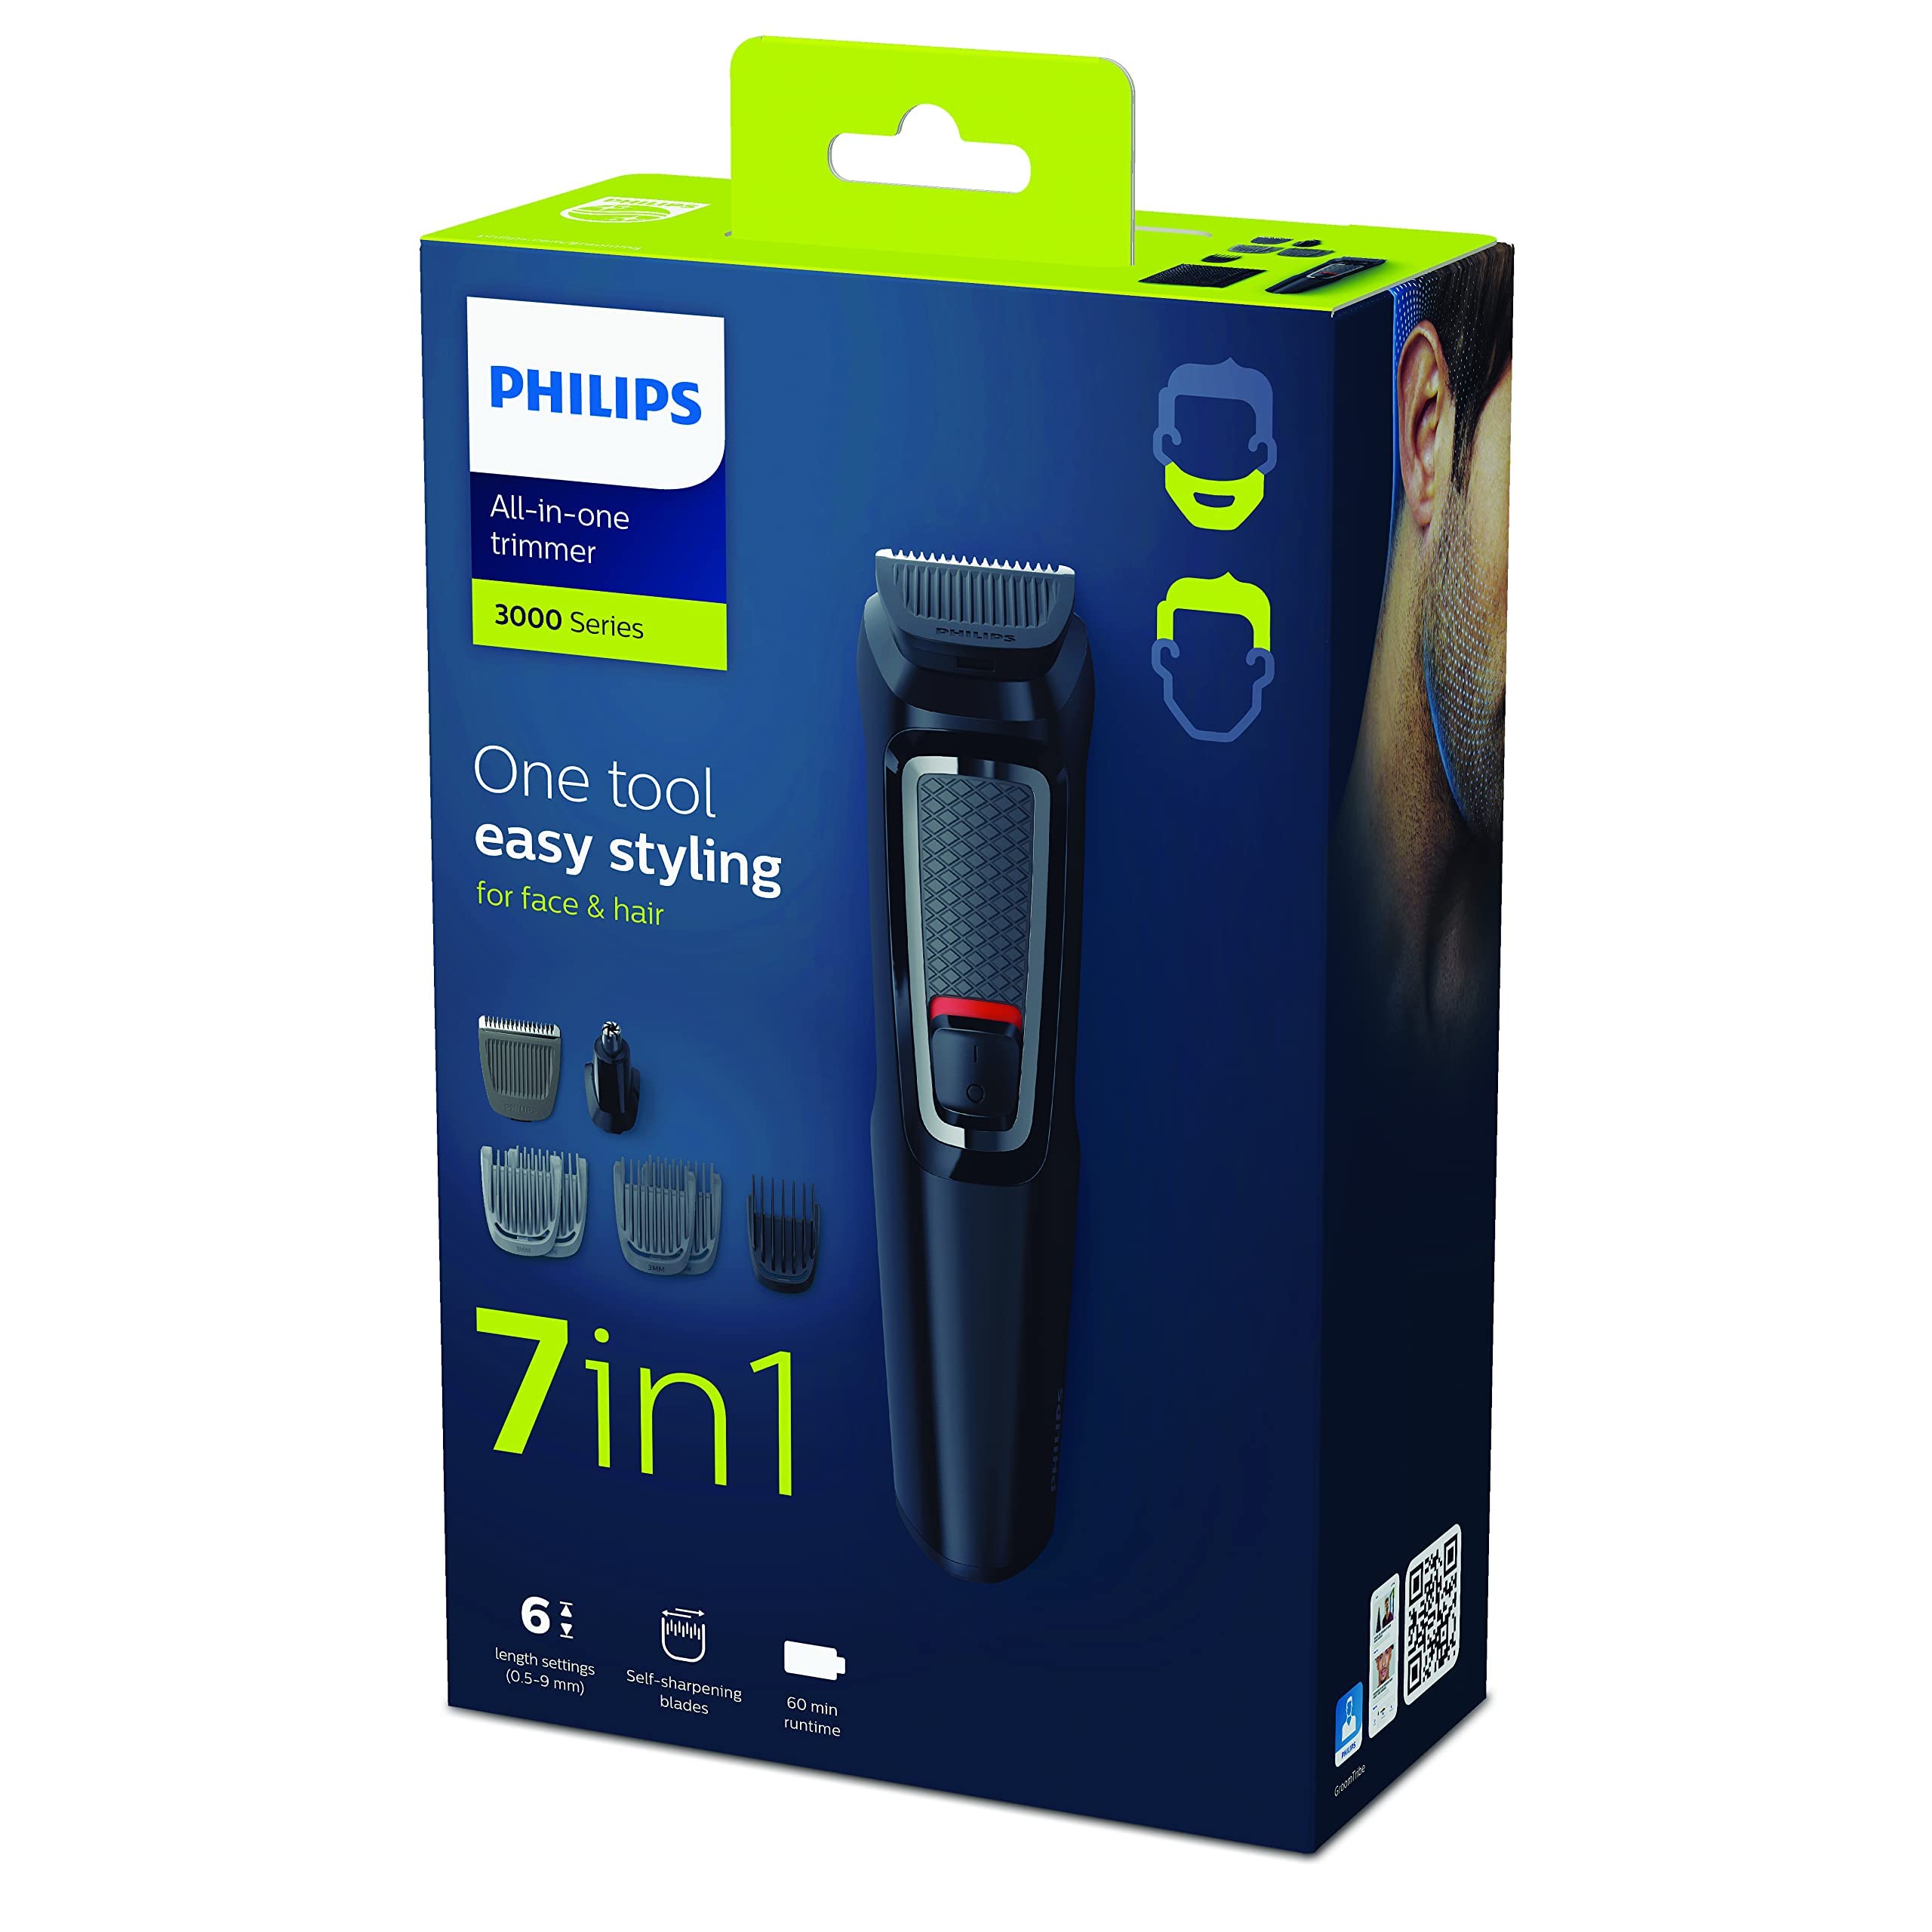 Philips 7-in-1 All-In-One Grooming Trimmer Self-Sharpening 3-Pin Kit Trimmer Hair Nose UK Including Multigroom Attachments & Series Blades 7 Beard 3000 7-in-1 for Plug-MG3720/33 with